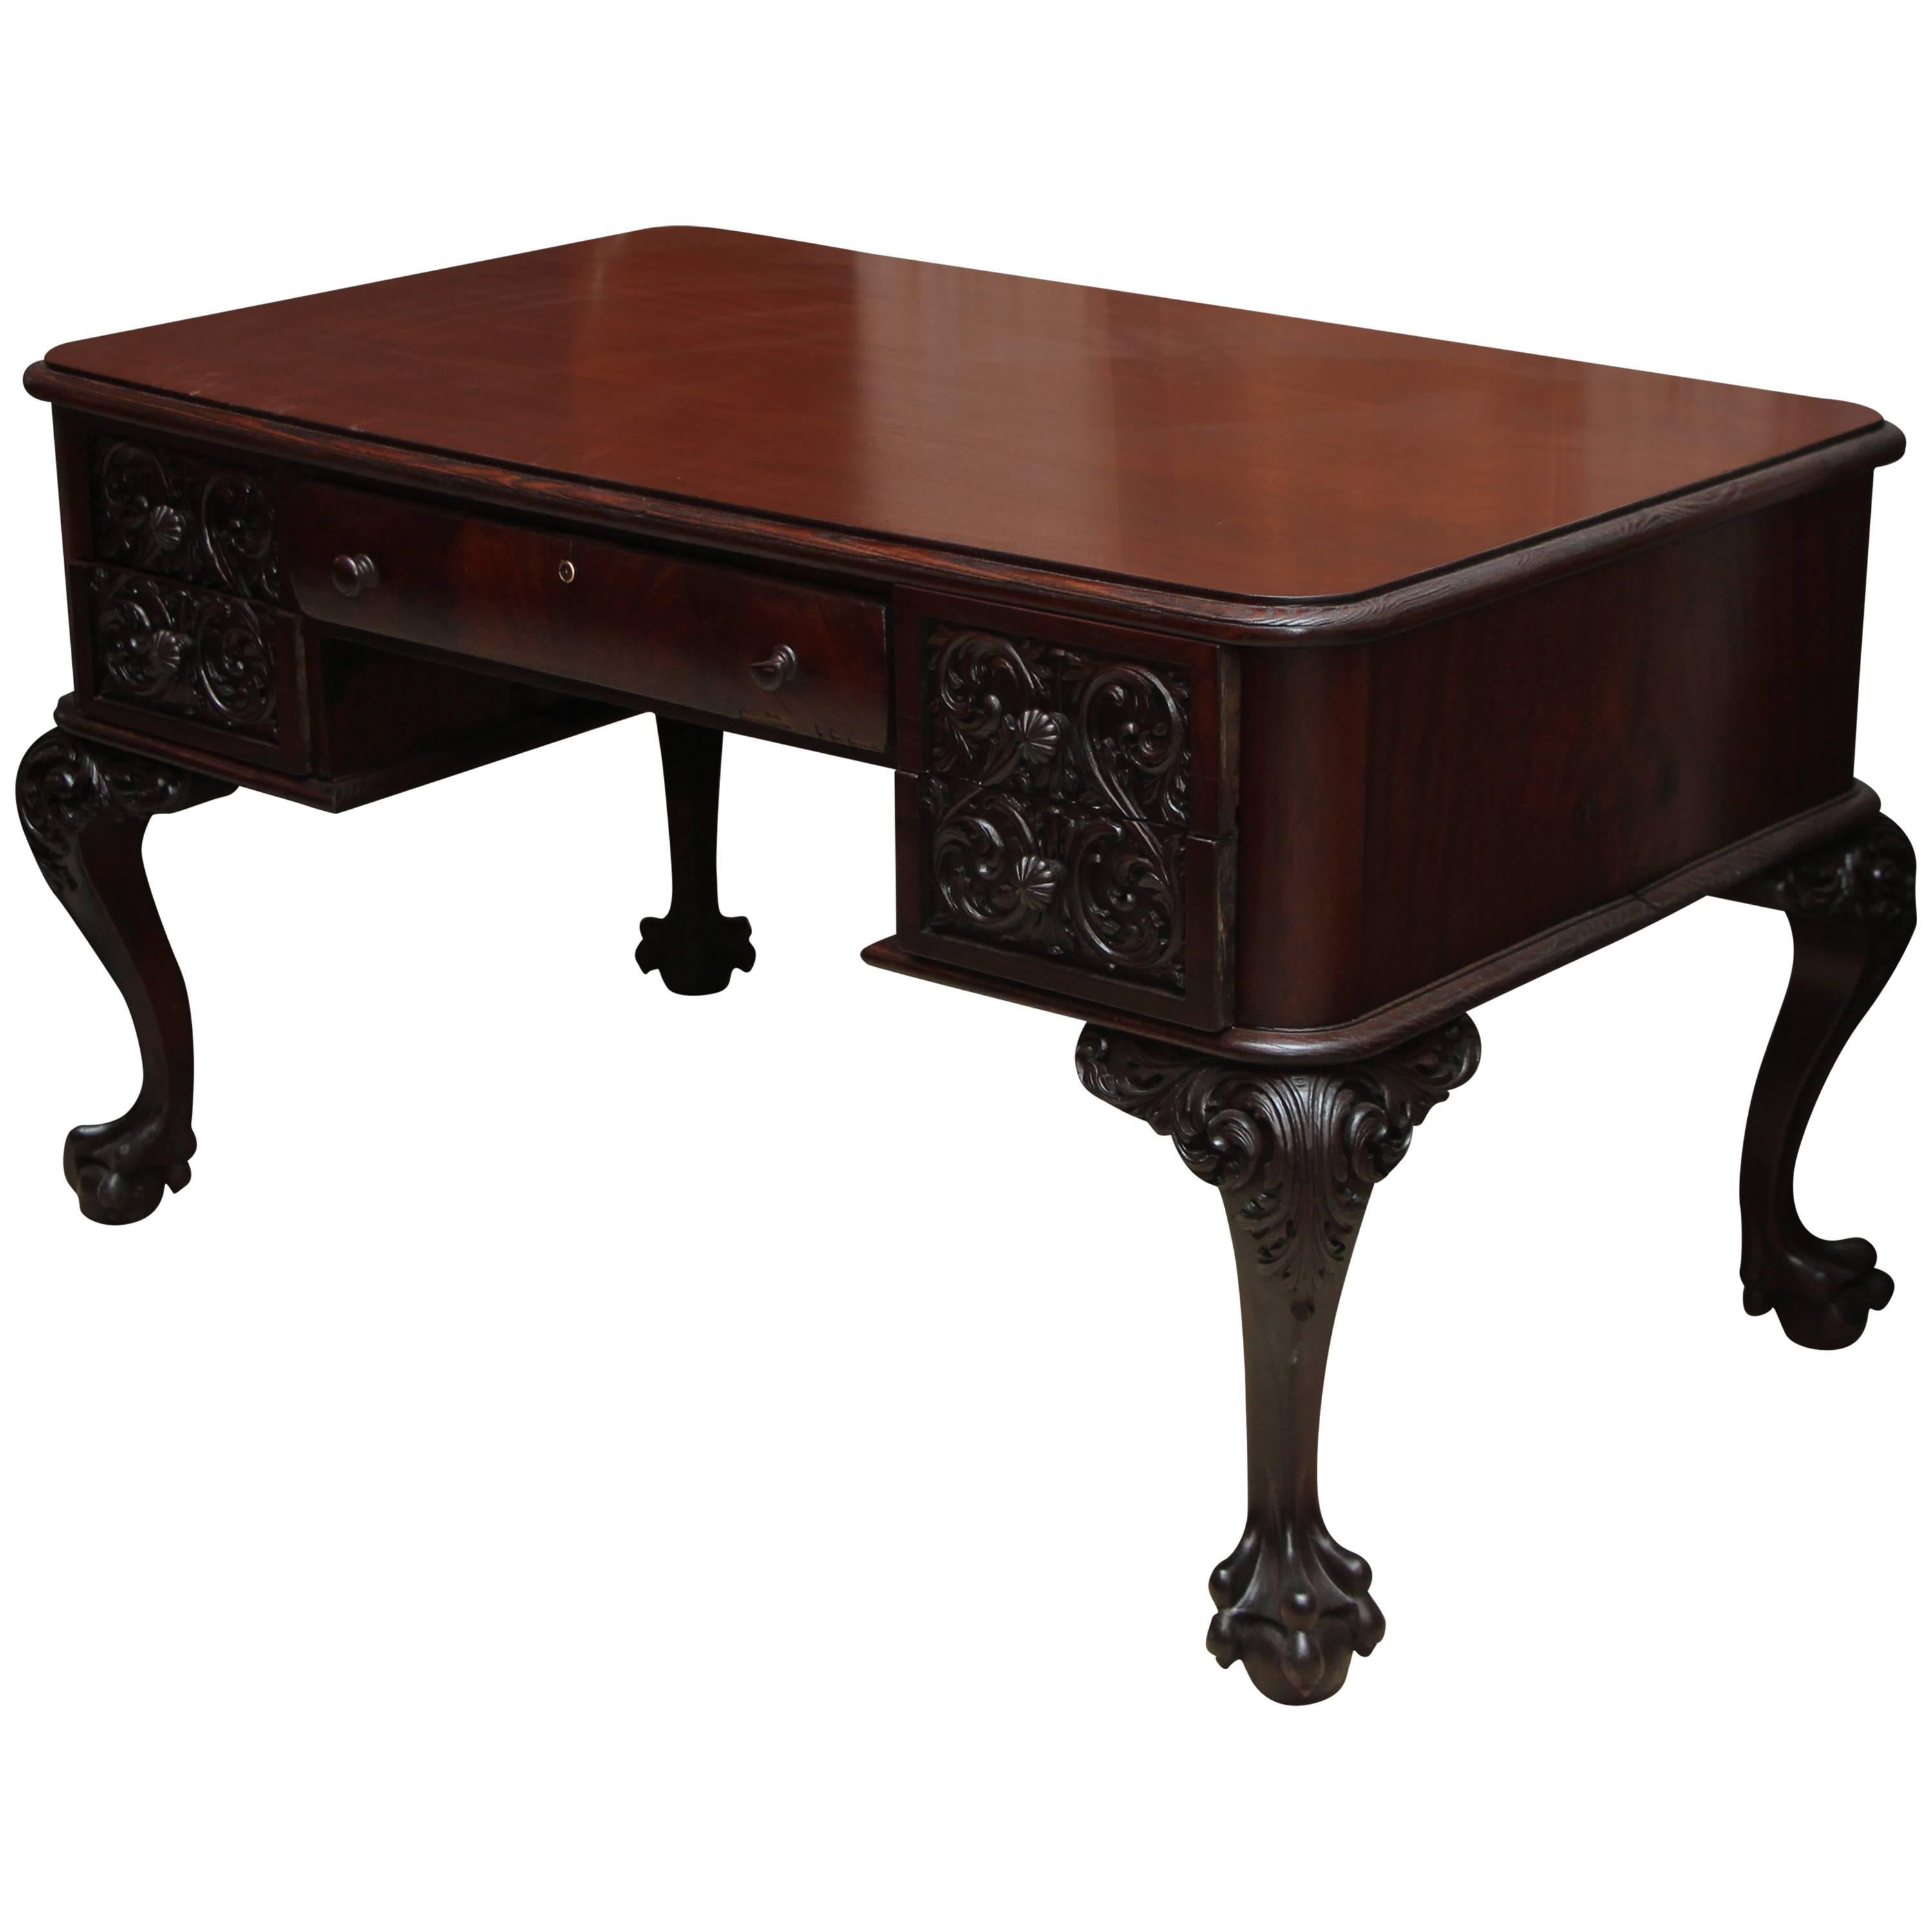 1910s Petite Flame Mahogany Carved Desk with Claw Feet